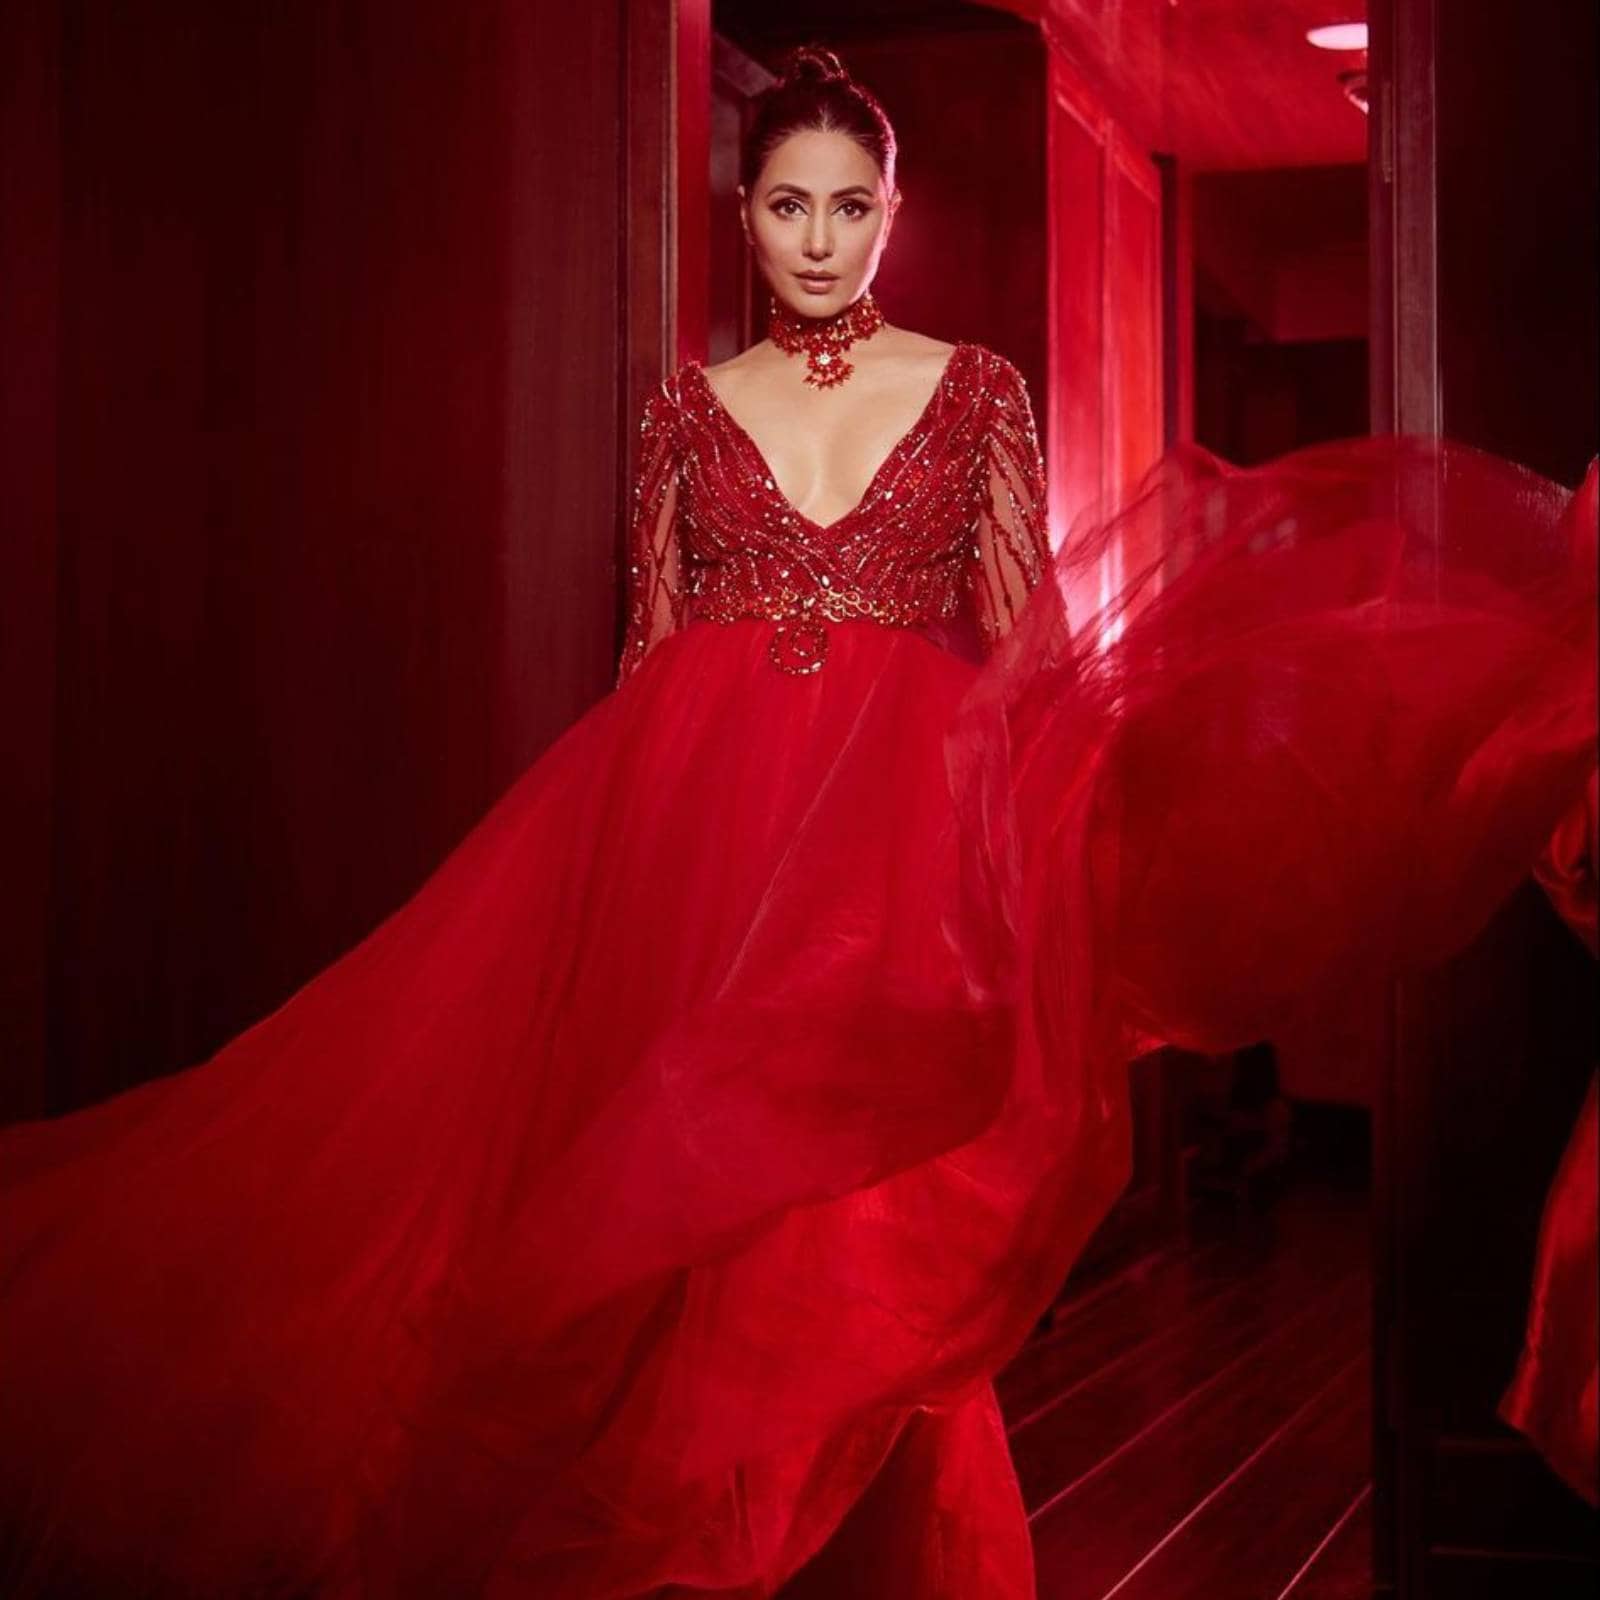 Hina Khan Makes Heads Turn In Glamorous Red Gown, See Look Sensational In These Pictures